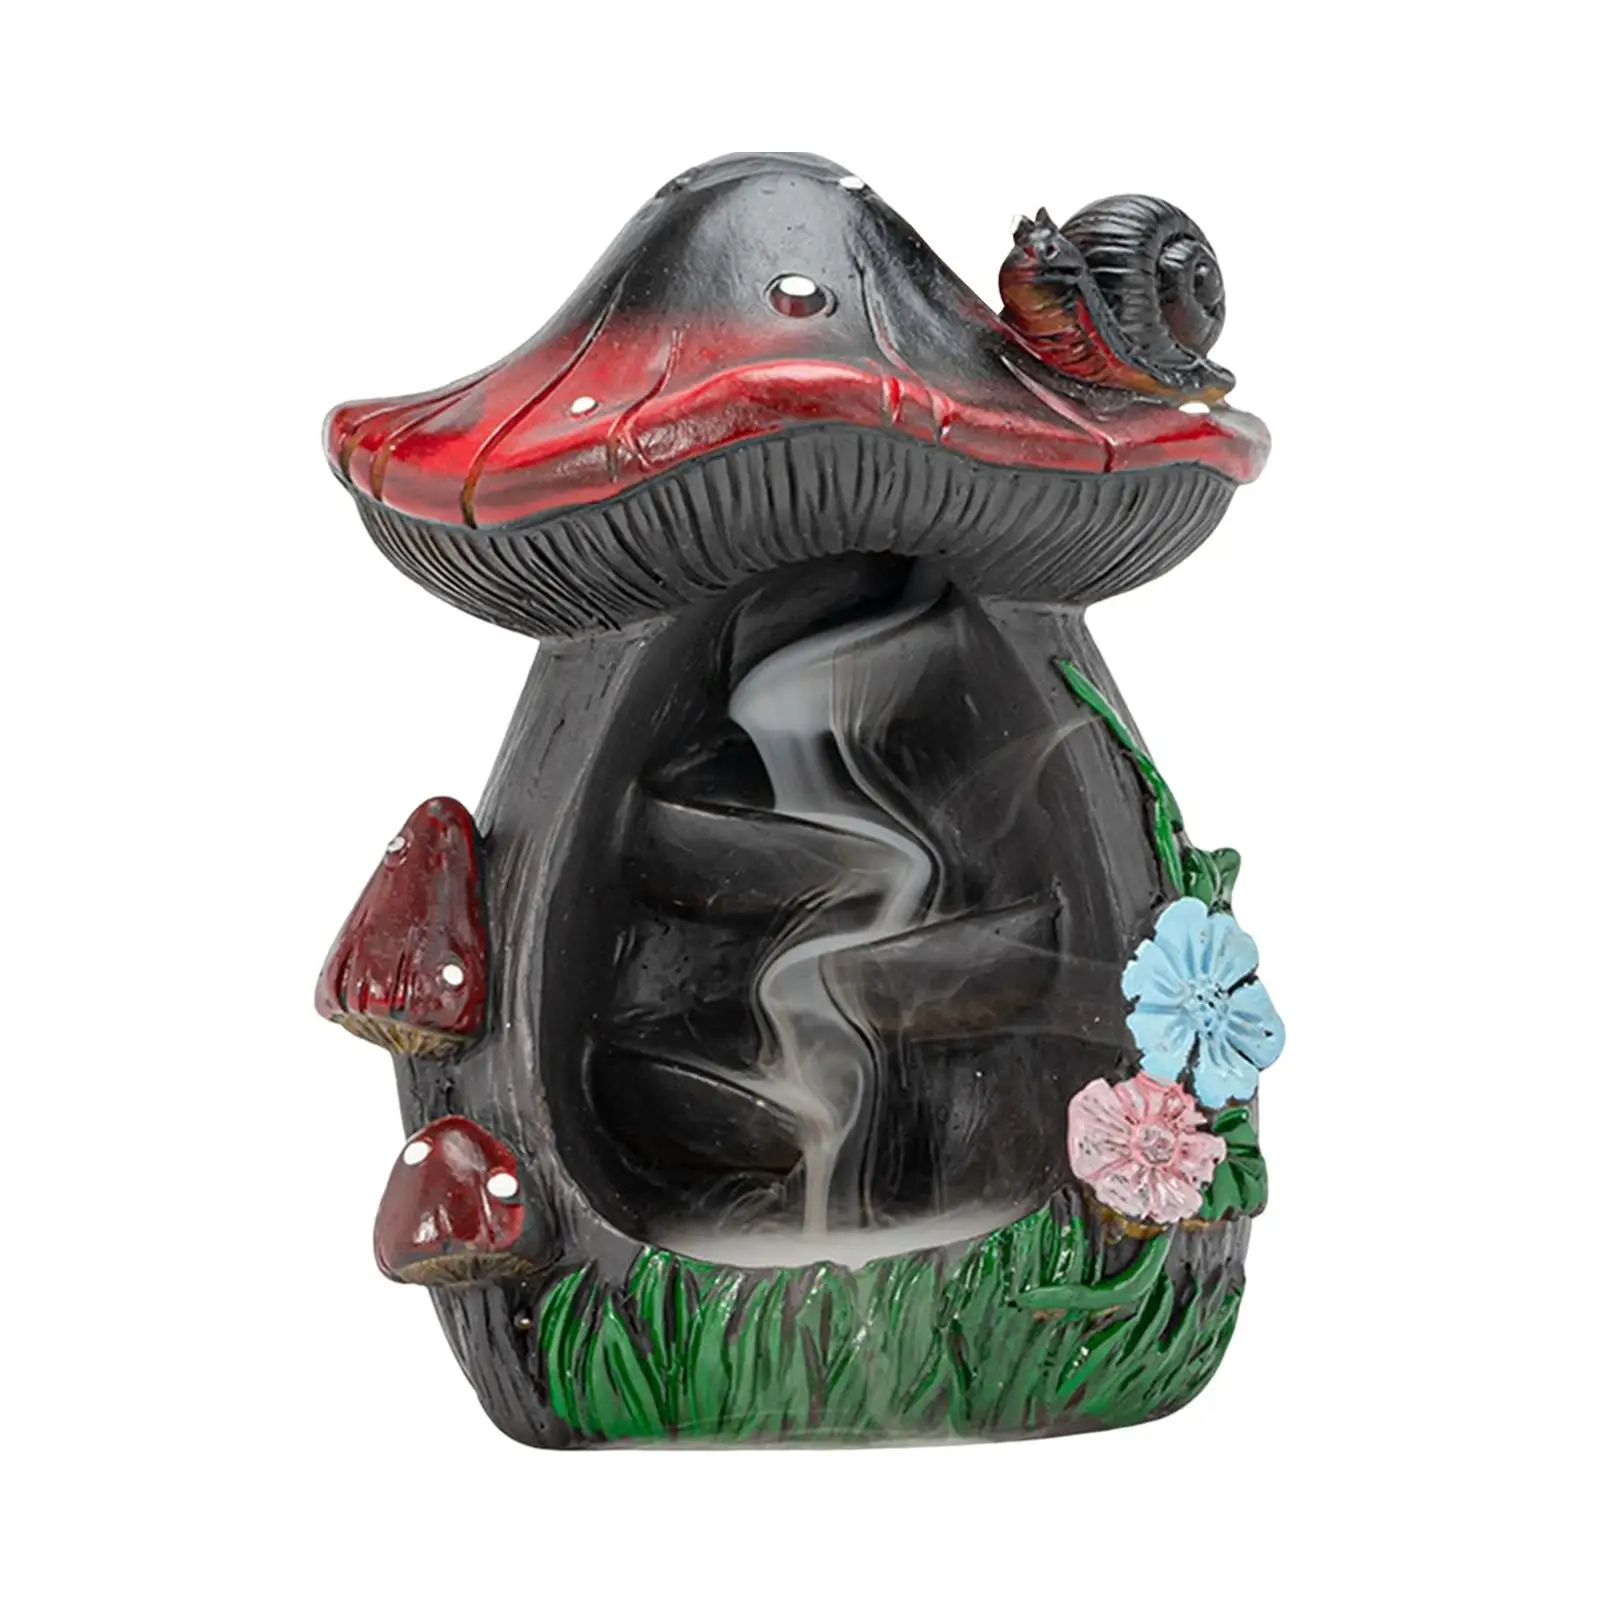 Resin Backflow Incense Burner Waterfall Incense Cone Holder for Office Decor